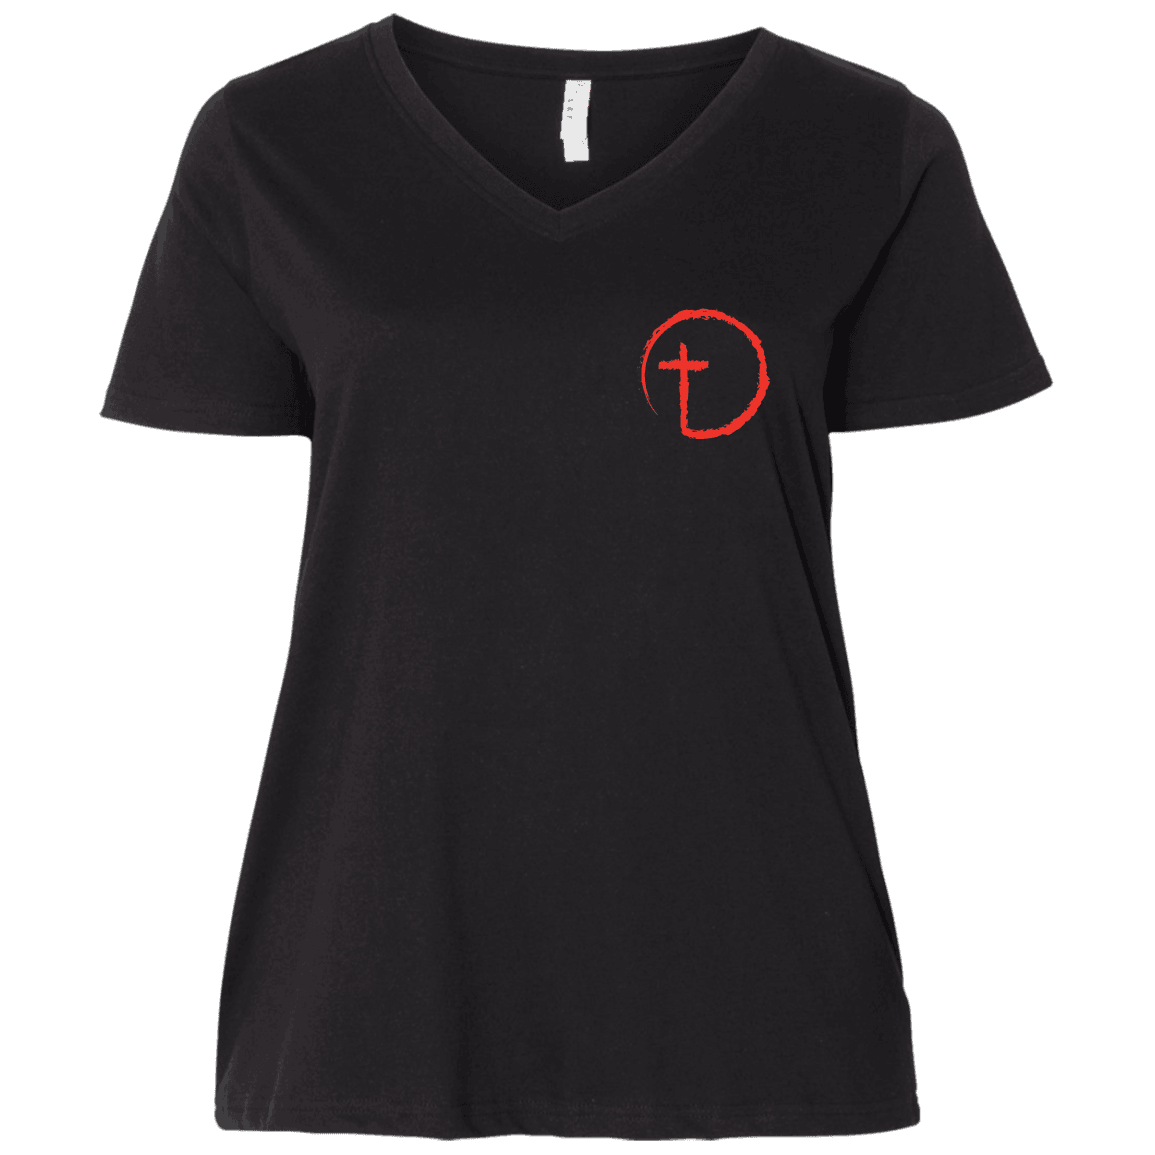 Designs by MyUtopia Shout Out:Abstract Cross Circle Ladies' Curvy V-Neck T-Shirt,Black/ / Plus 1X,Ladies T-Shirts